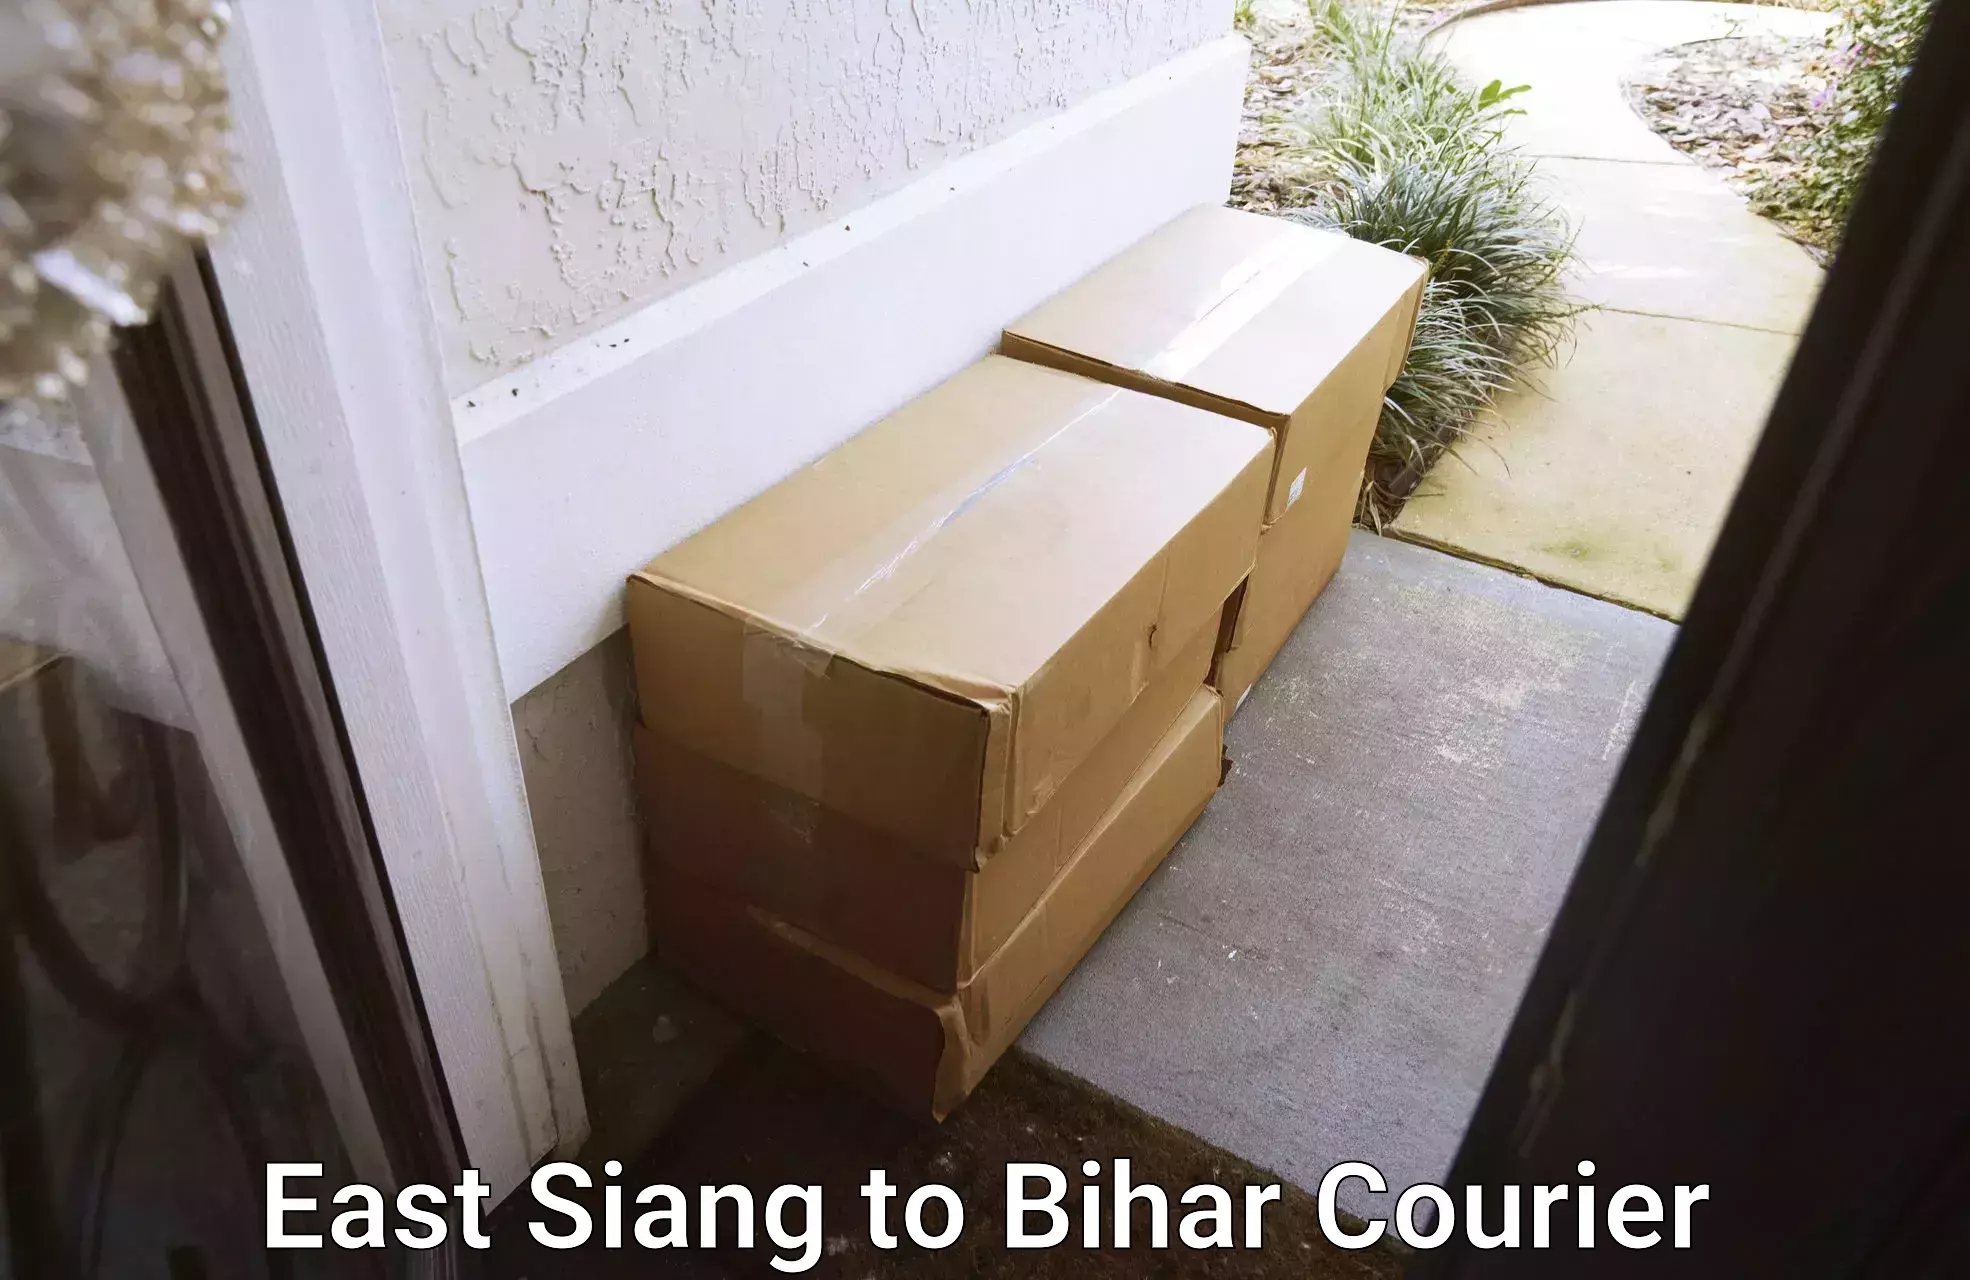 Local courier options East Siang to Bihar